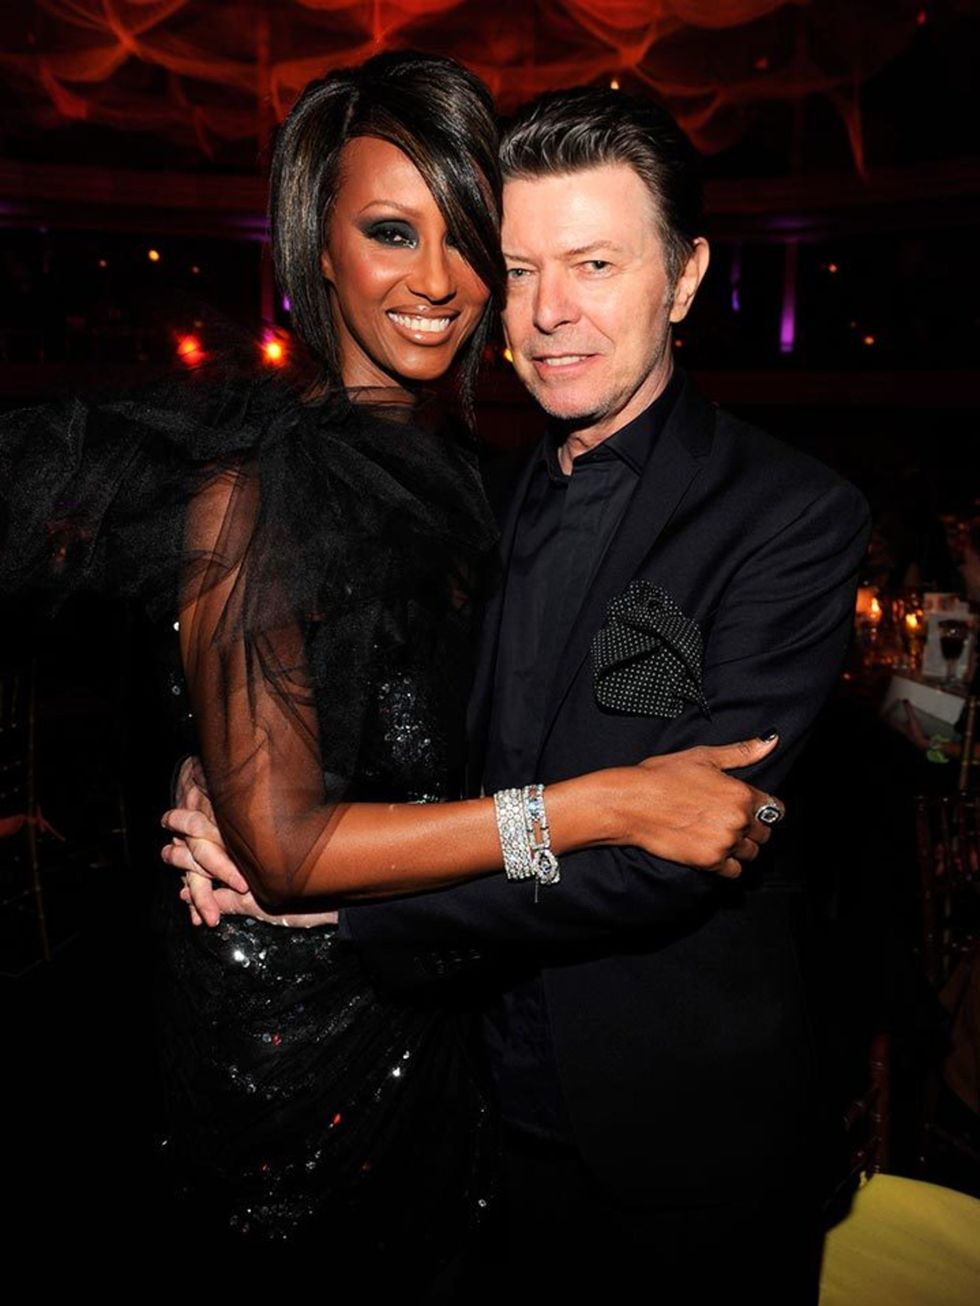 <p>Iman and David Bowie</p>

<p>He's previously been quoted as saying, I was naming the children the first night we met, so if that's not love at first sight, what is? The couple have been married for 22 years and have a daughter together, 13-year-old A